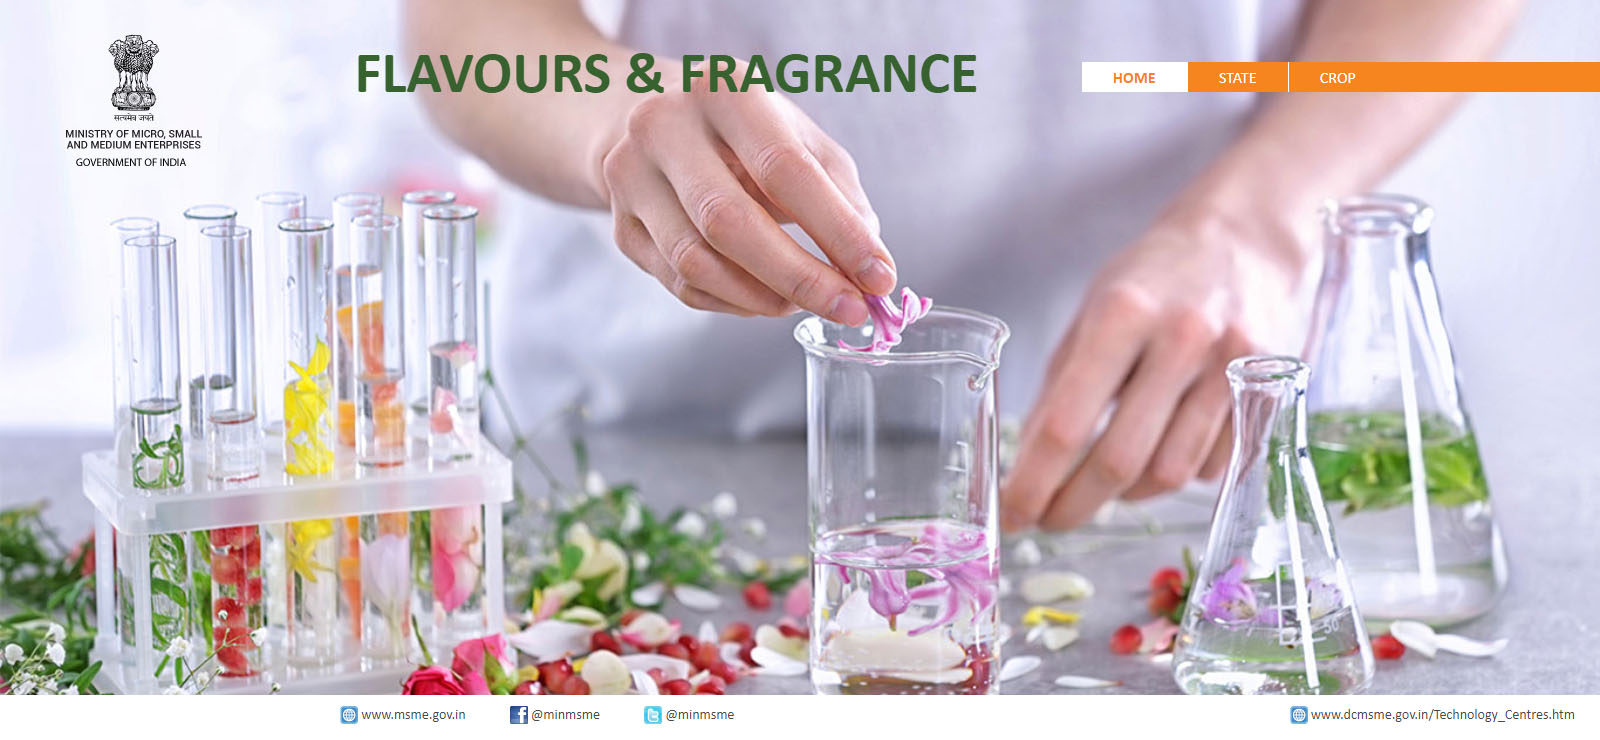 flavours-and-fragrance-homepage